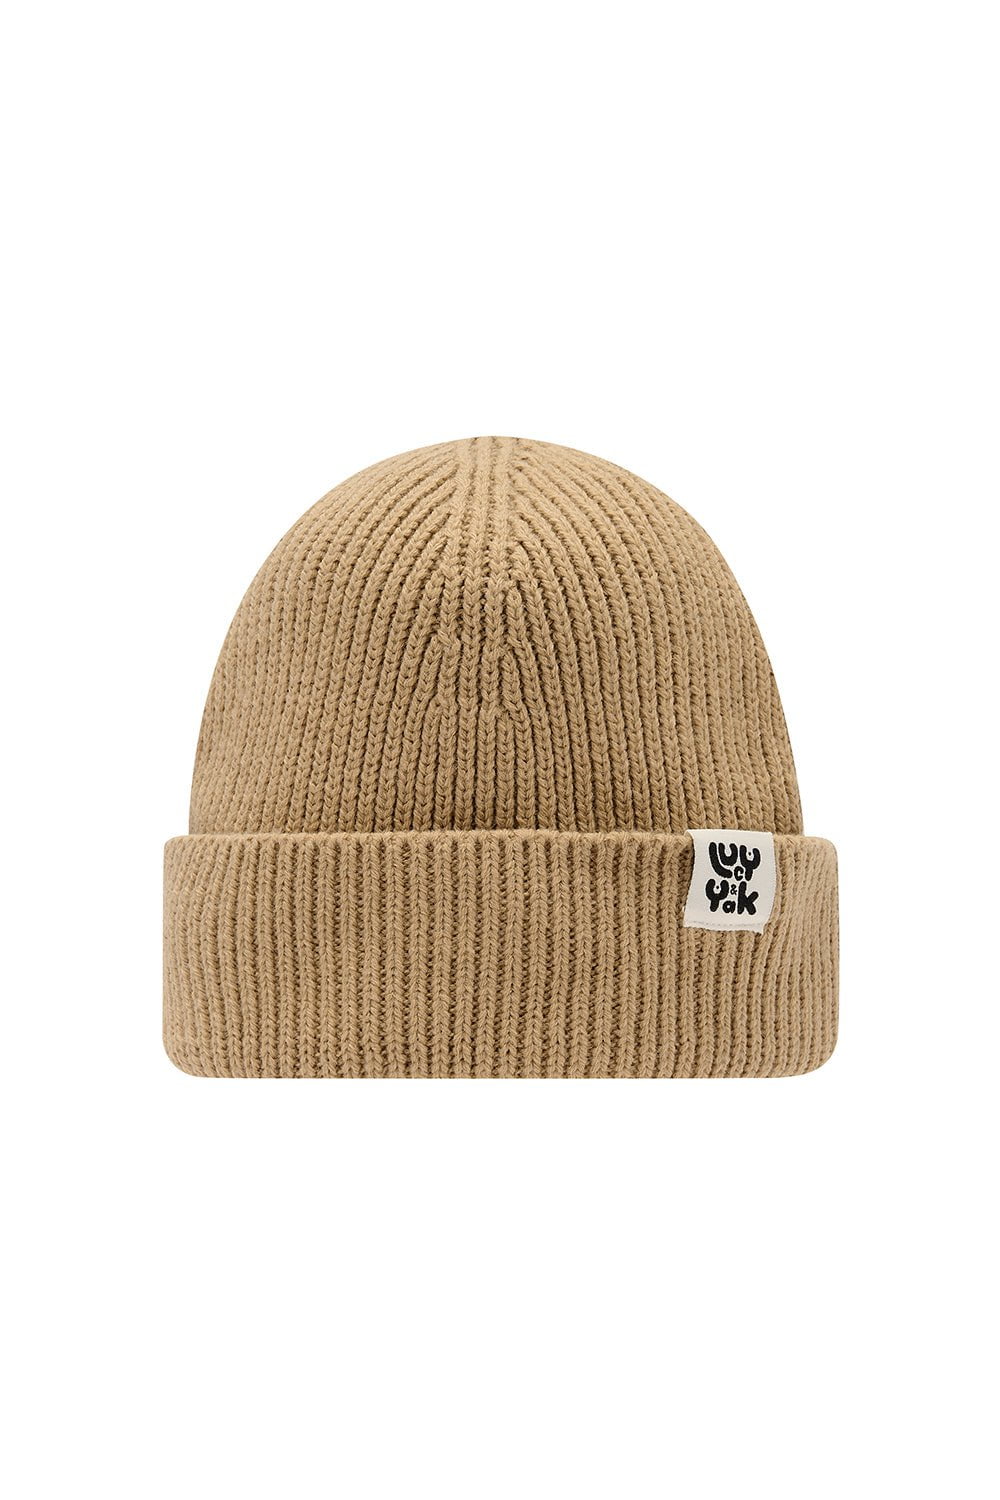 Lucy & Yak Hats Luca Beanie: RECYCLED POLYESTER - Barley